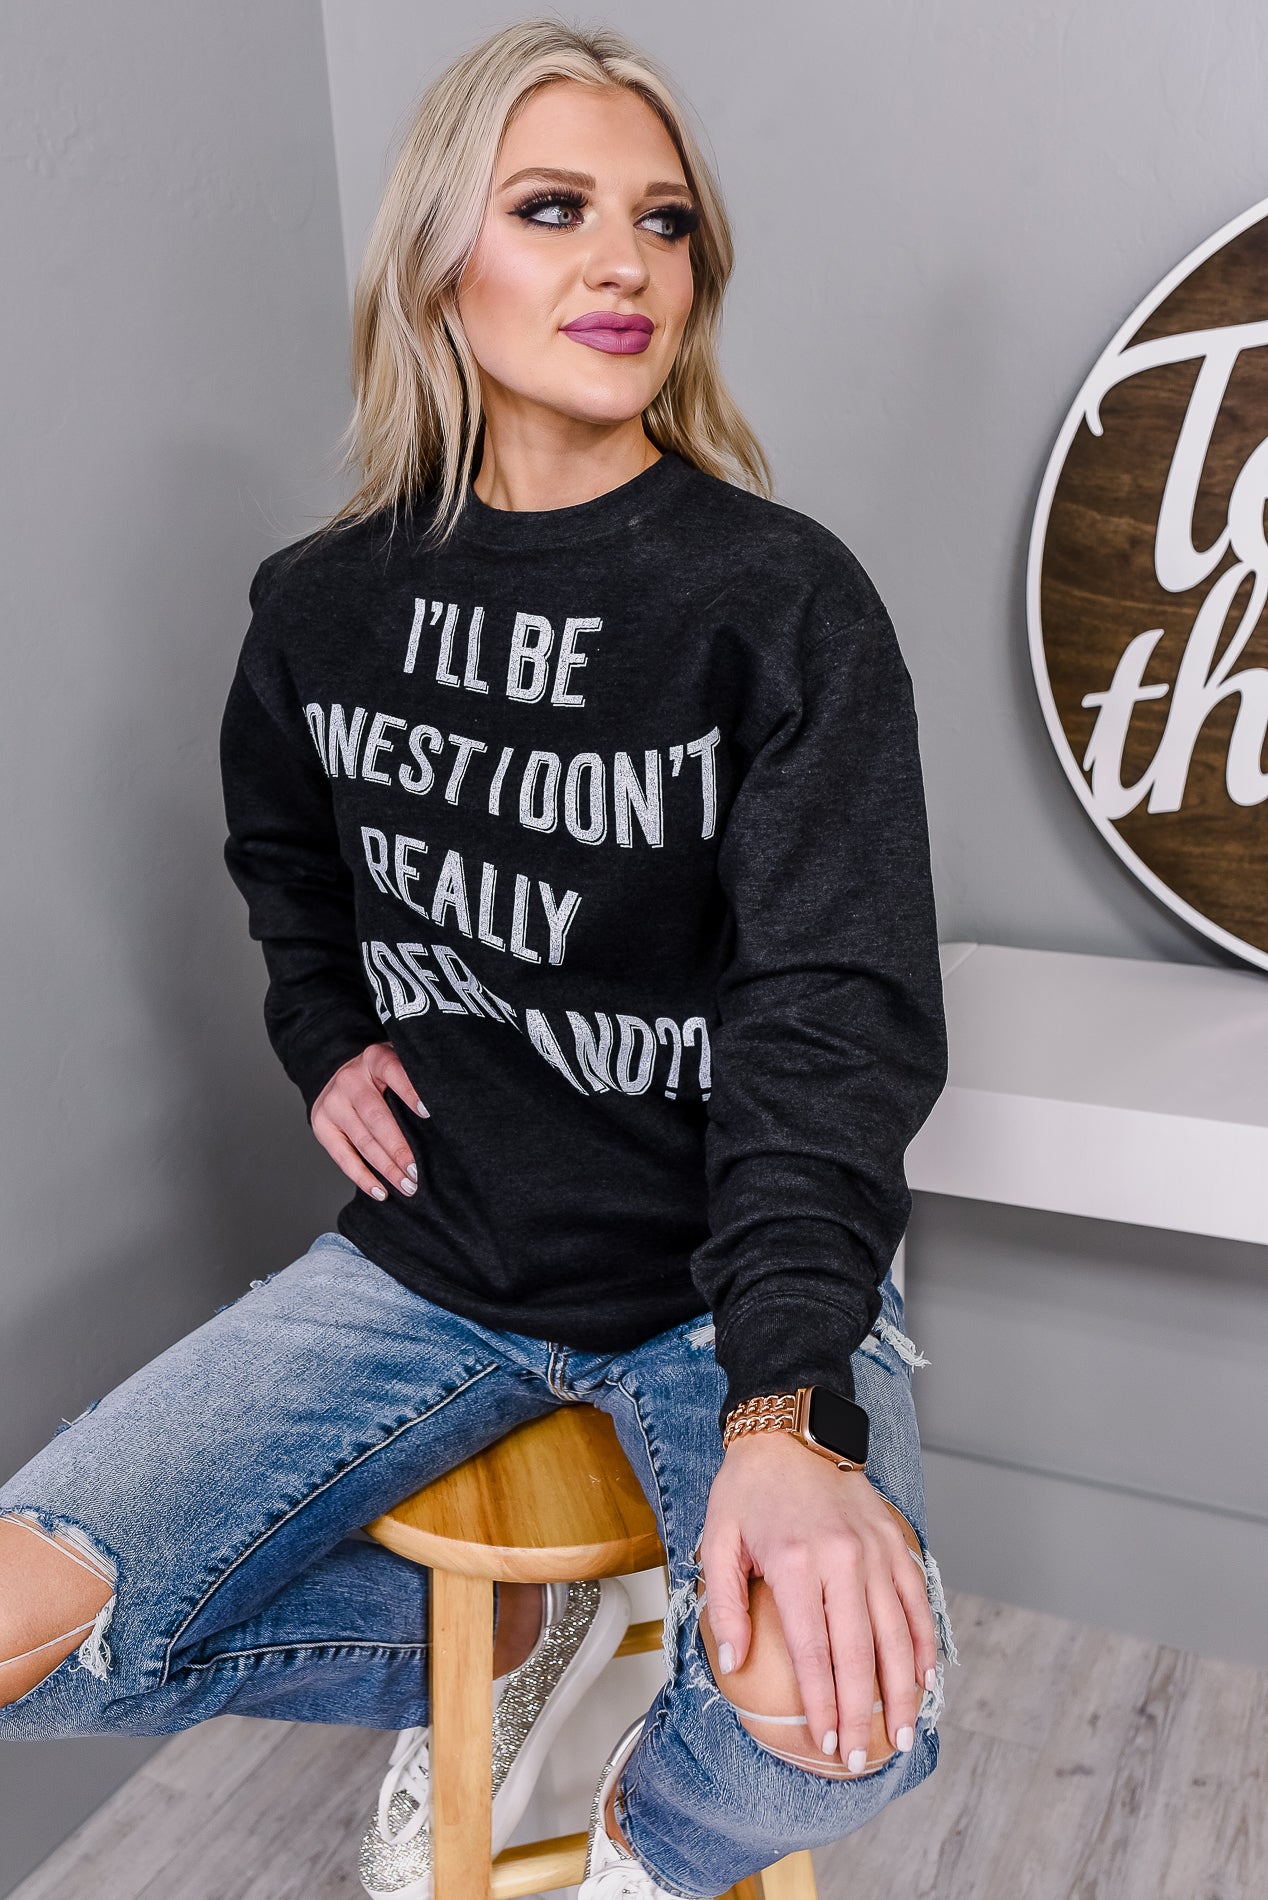 I'll Be Honest I Don't Really Understand Charcoal Gray Graphic Sweater - A1853CG